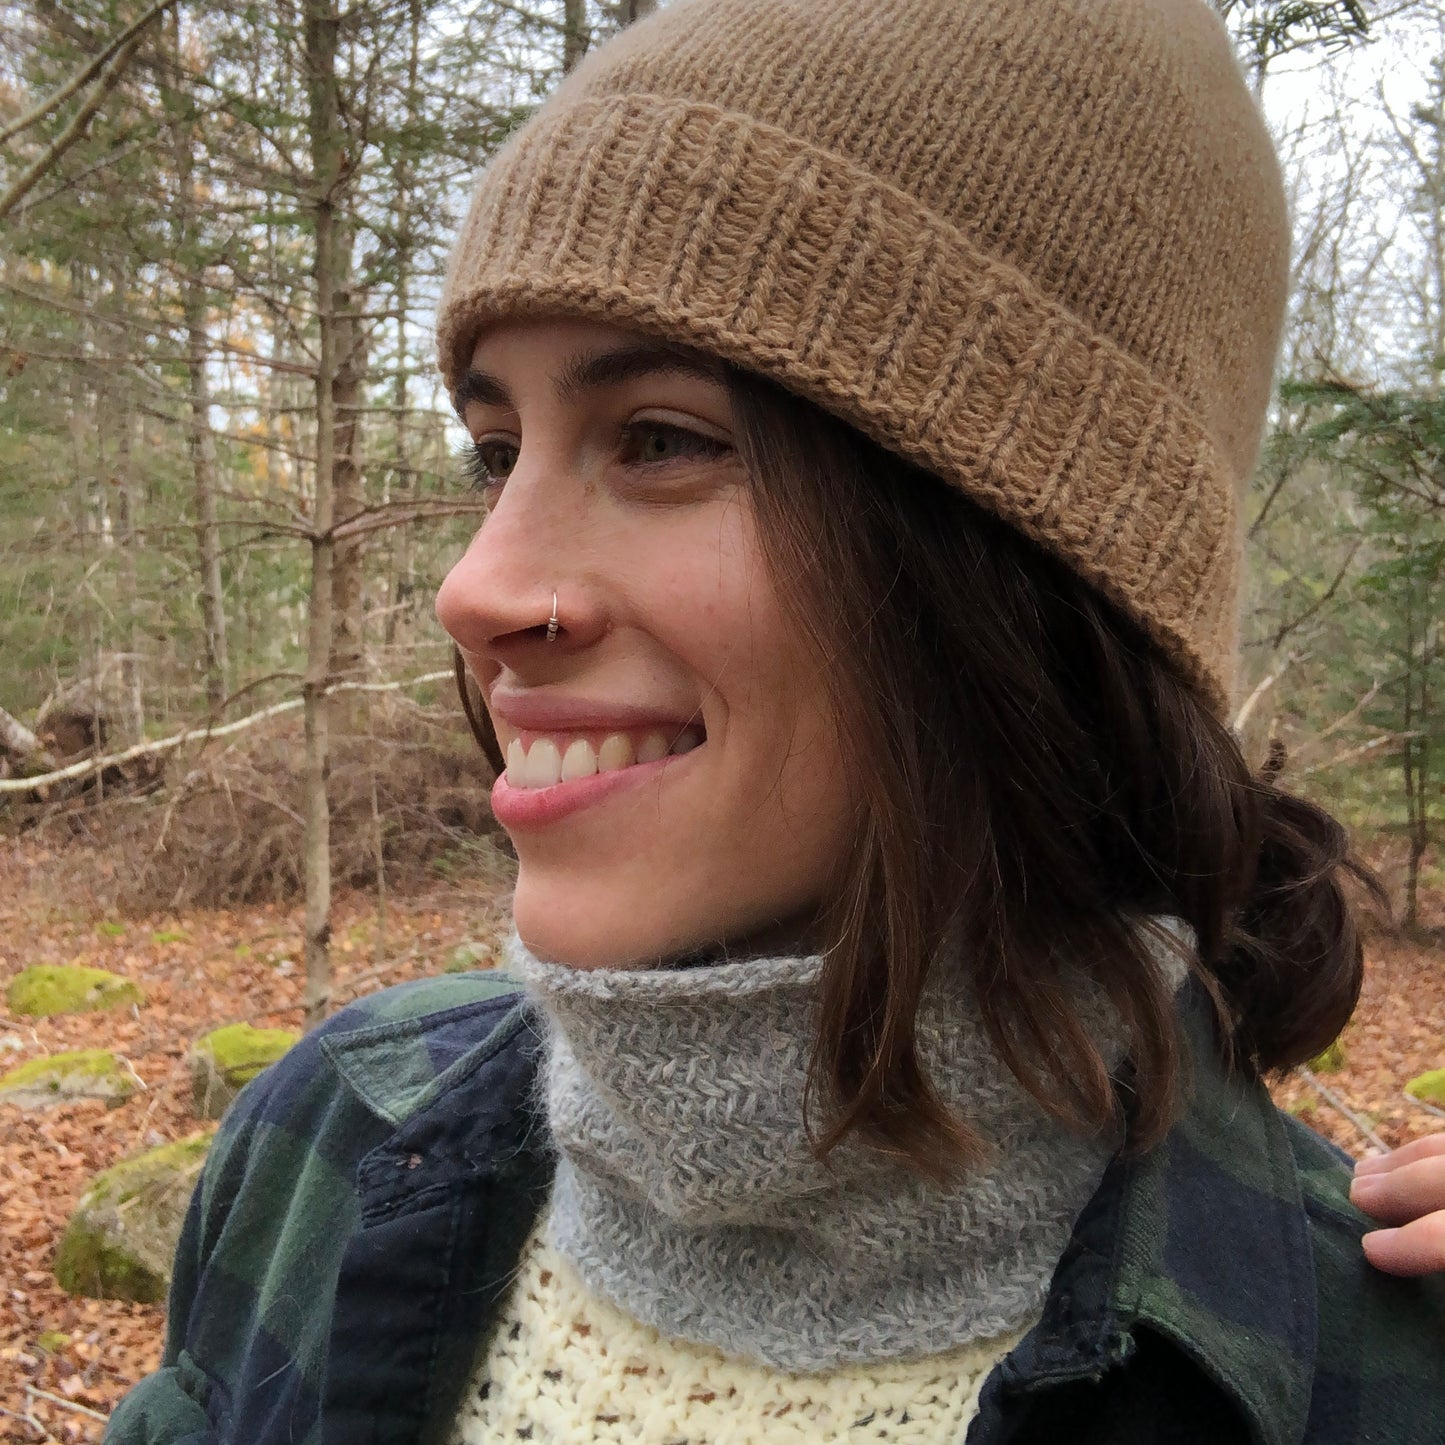 Pam wearing the grey nor'easter neck warmer paired with the cashmere toque and smiling, looking off to the left of the camera. The upcycled buff looks thin but cozy and woolen.